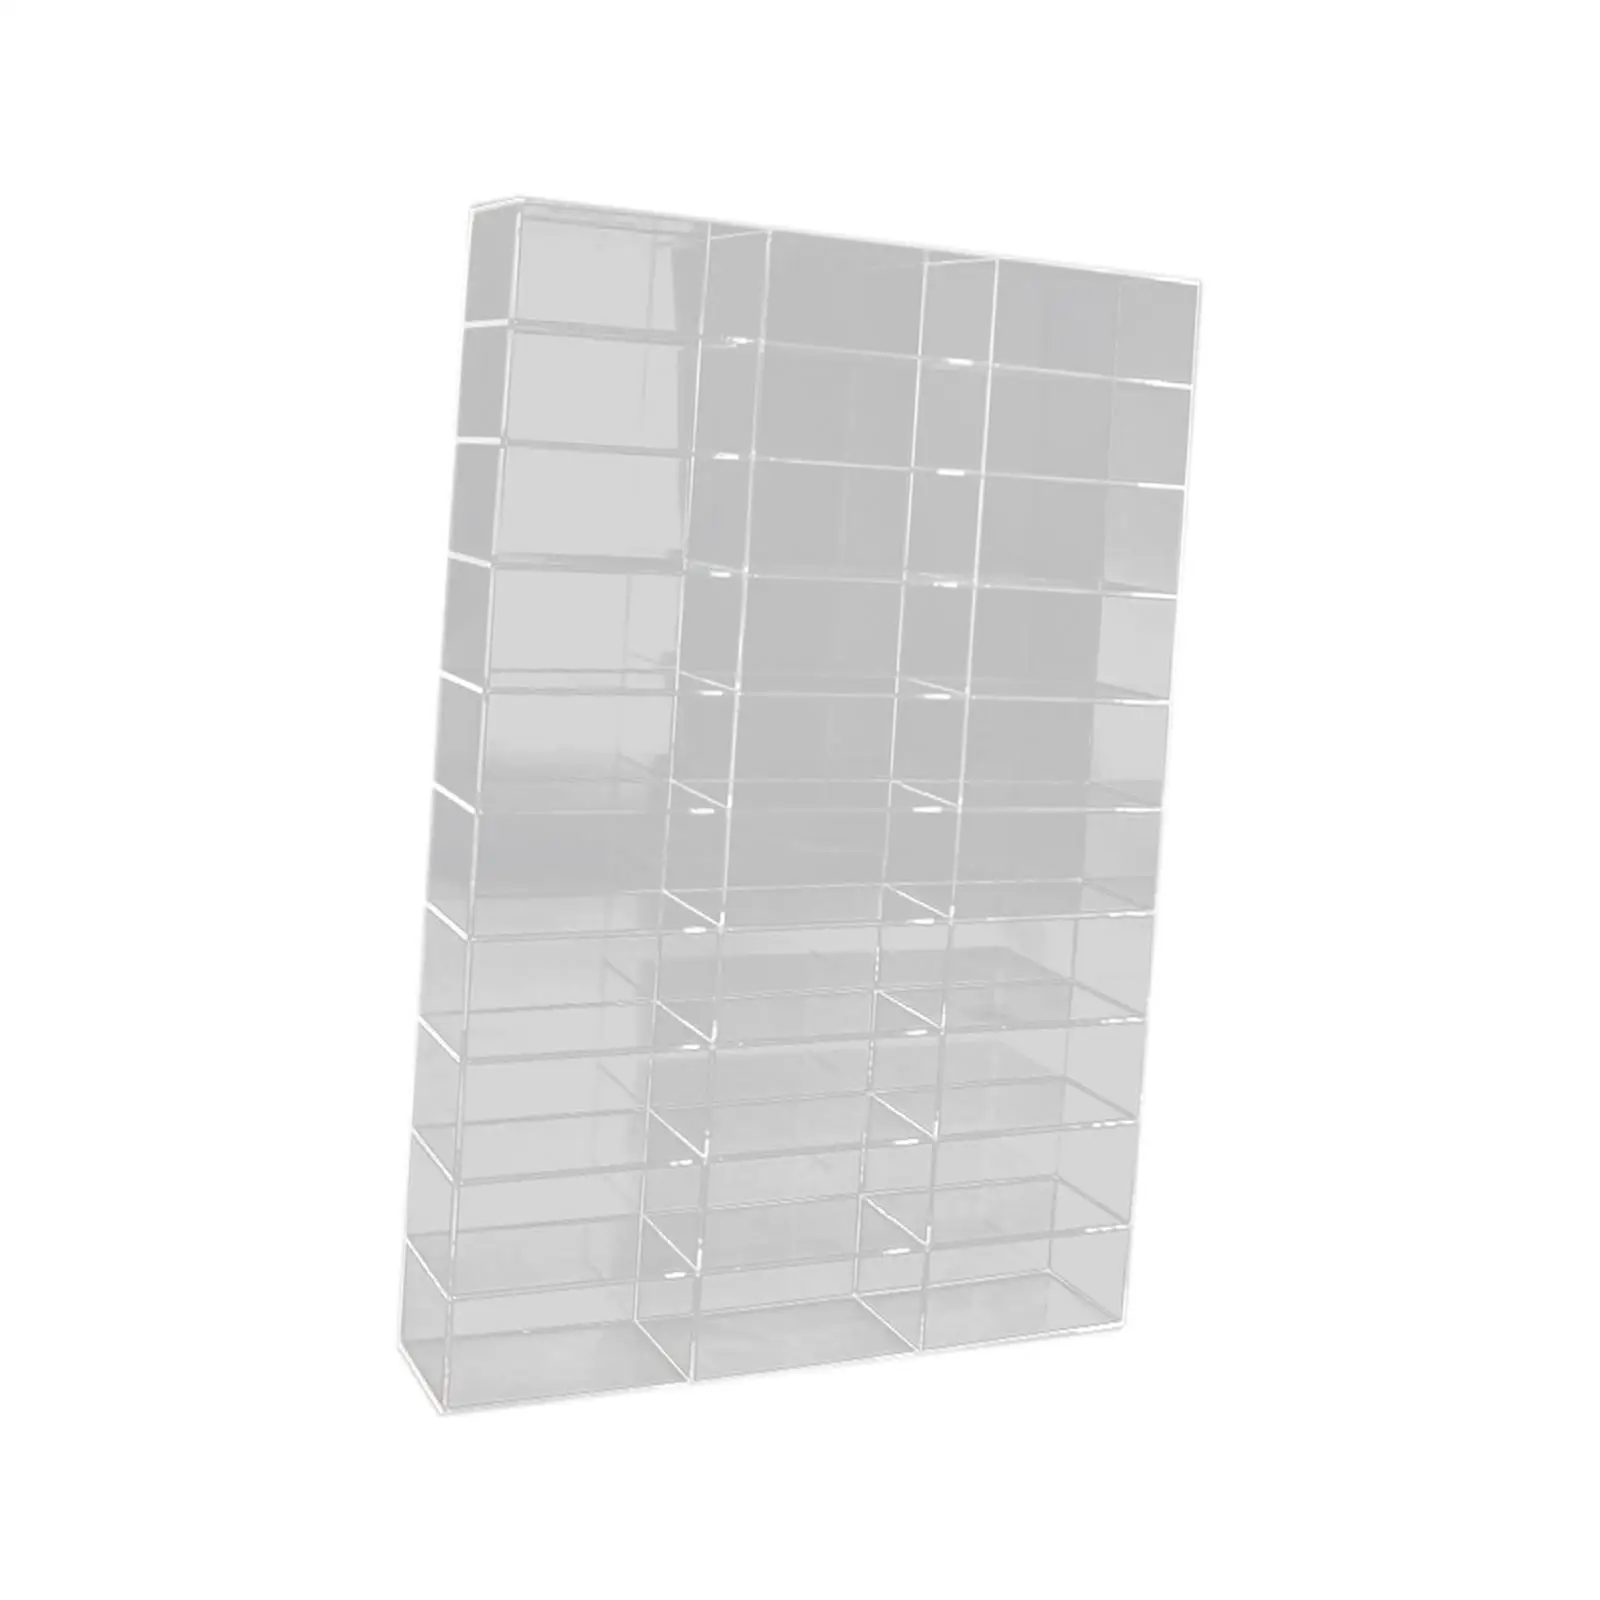 Clear 1/64 Model Car Display Case Display Rack Action Figures Holder Showcase Toys Display Case for Collectibles Model Car Toy